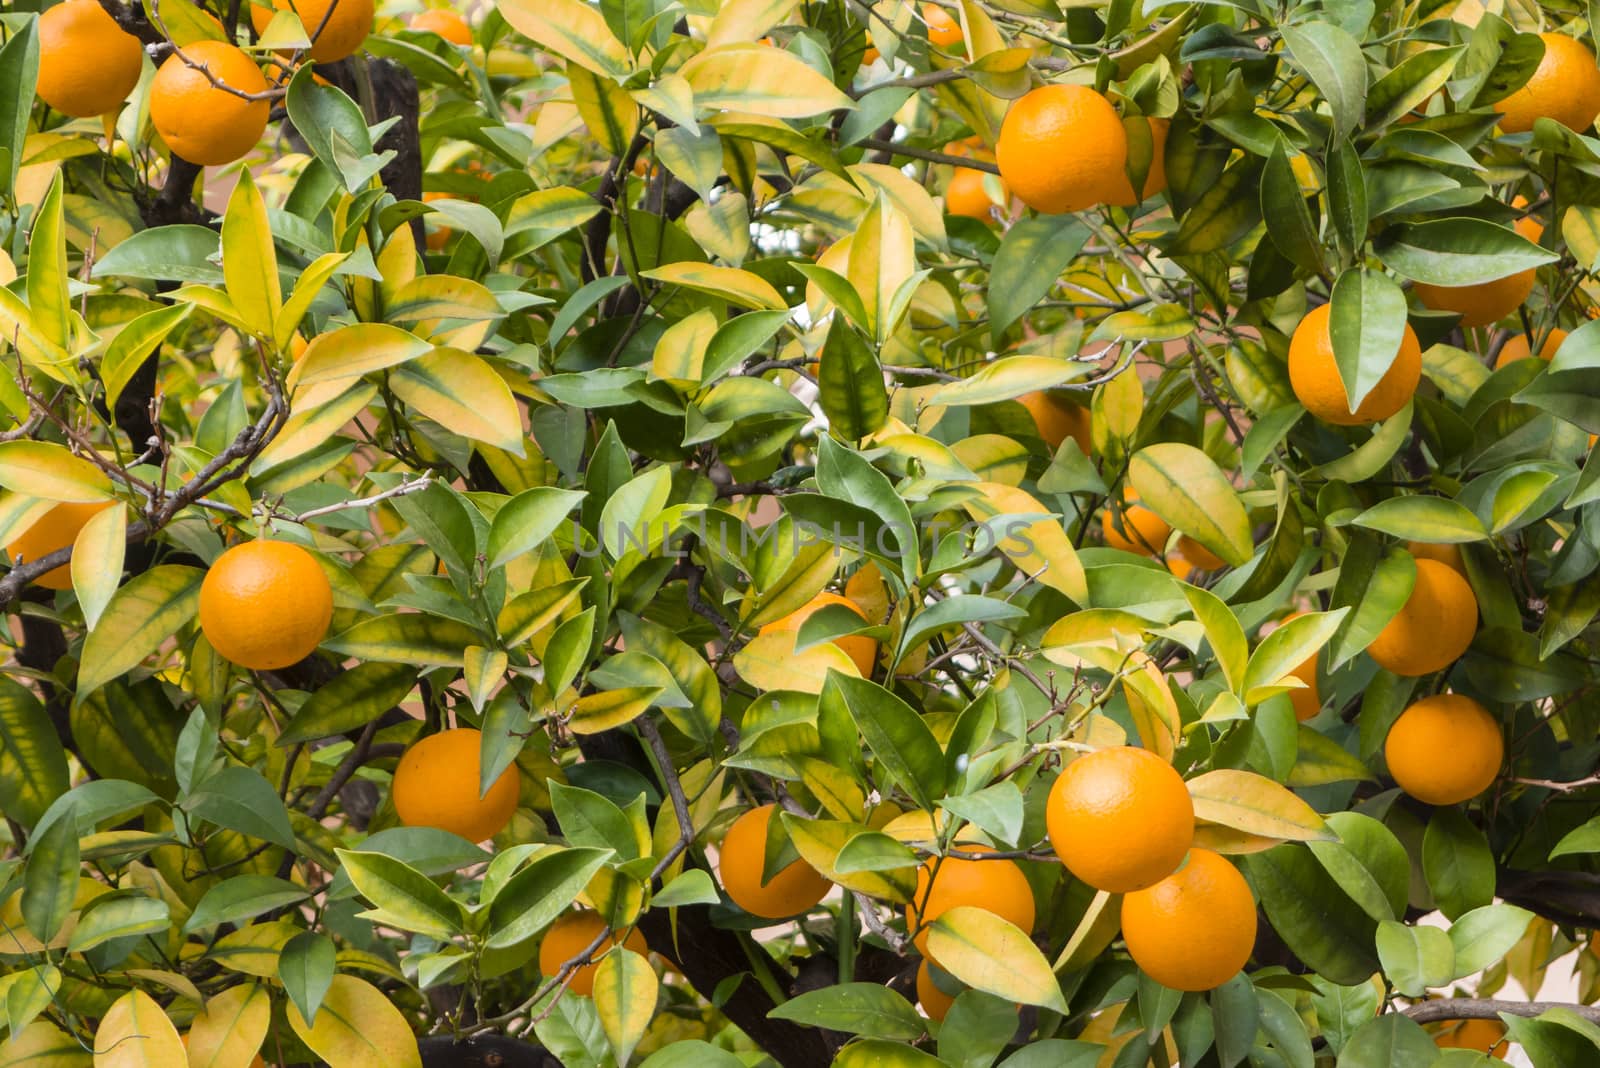 Orange fruits on trees by AlessandroZocc